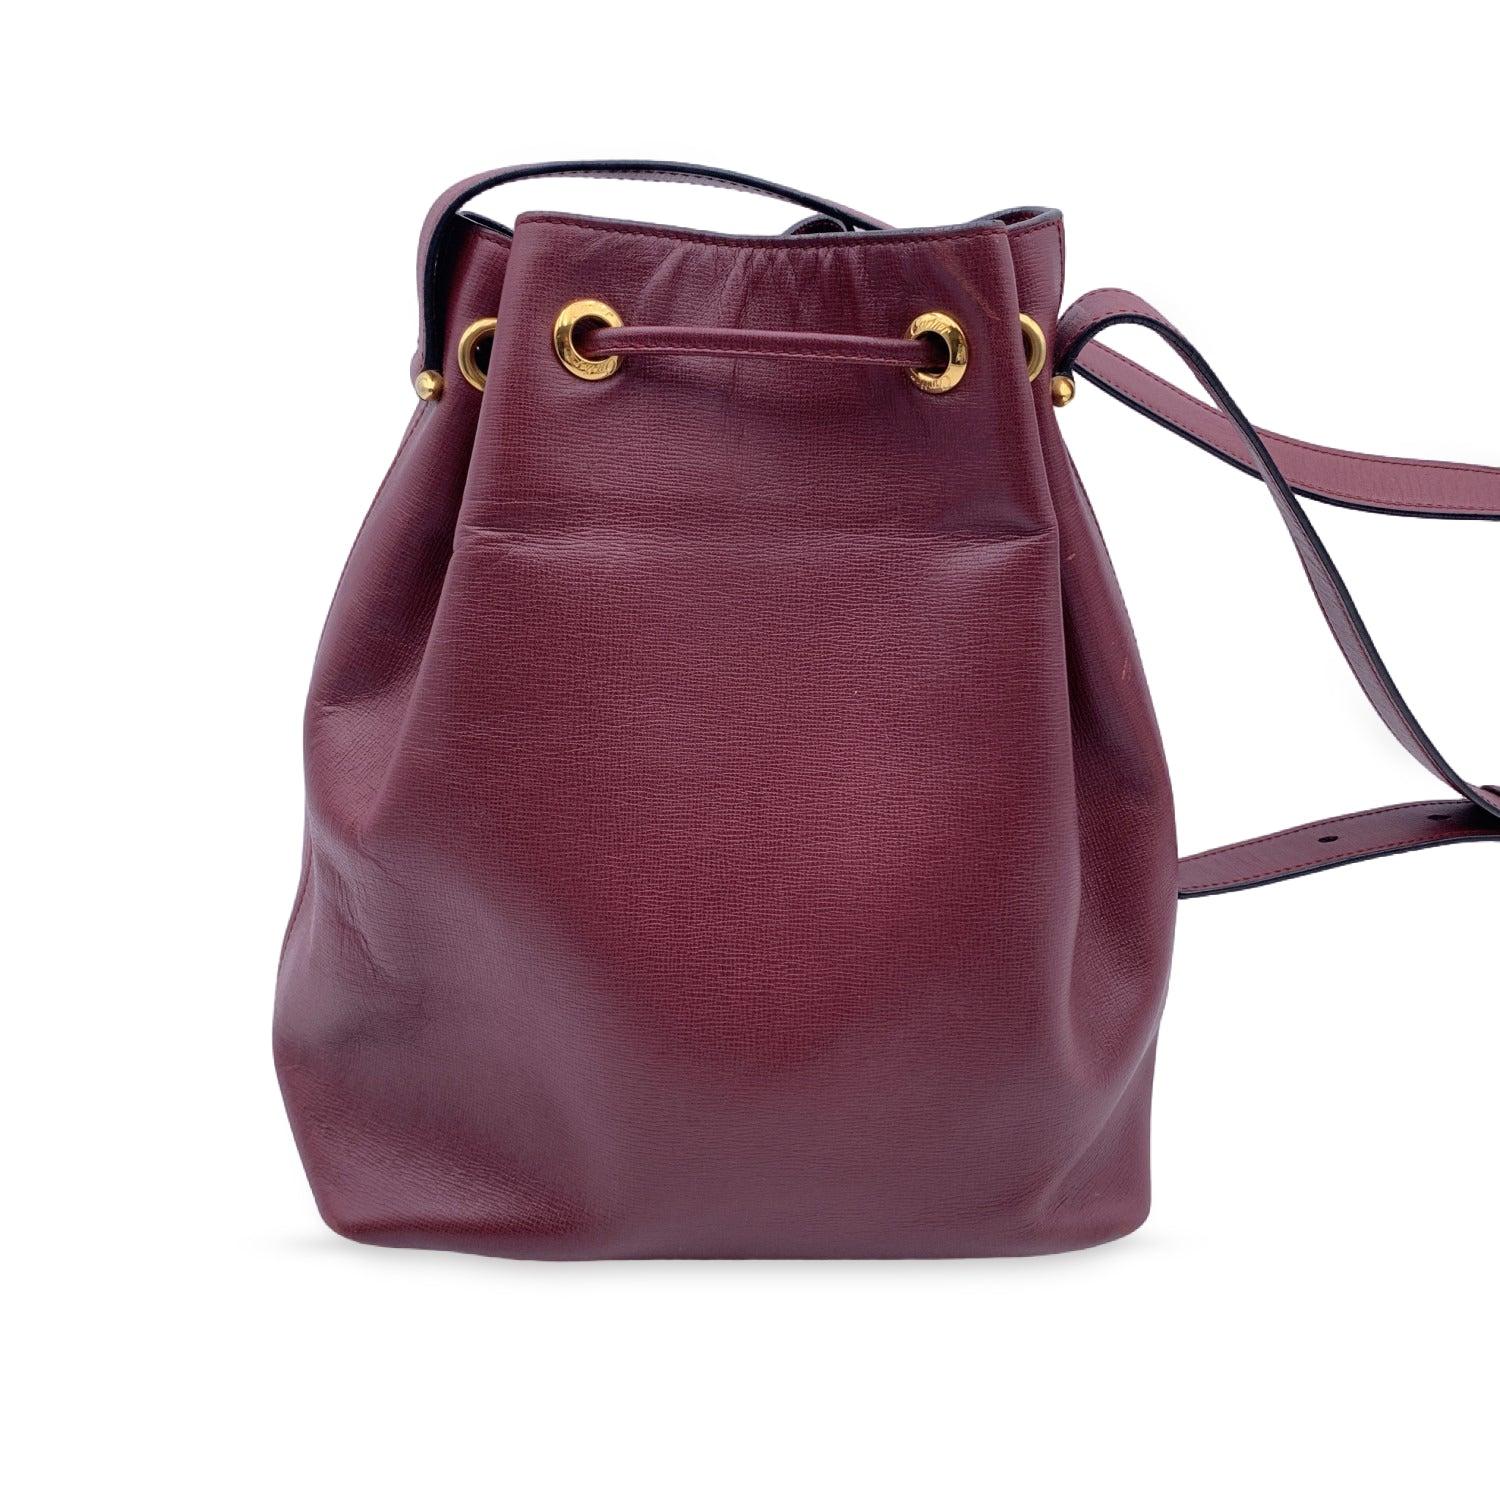 Cartier Vintage Burgundy Leather Drawstring Bucket Shoulder Bag In Excellent Condition In Rome, Rome